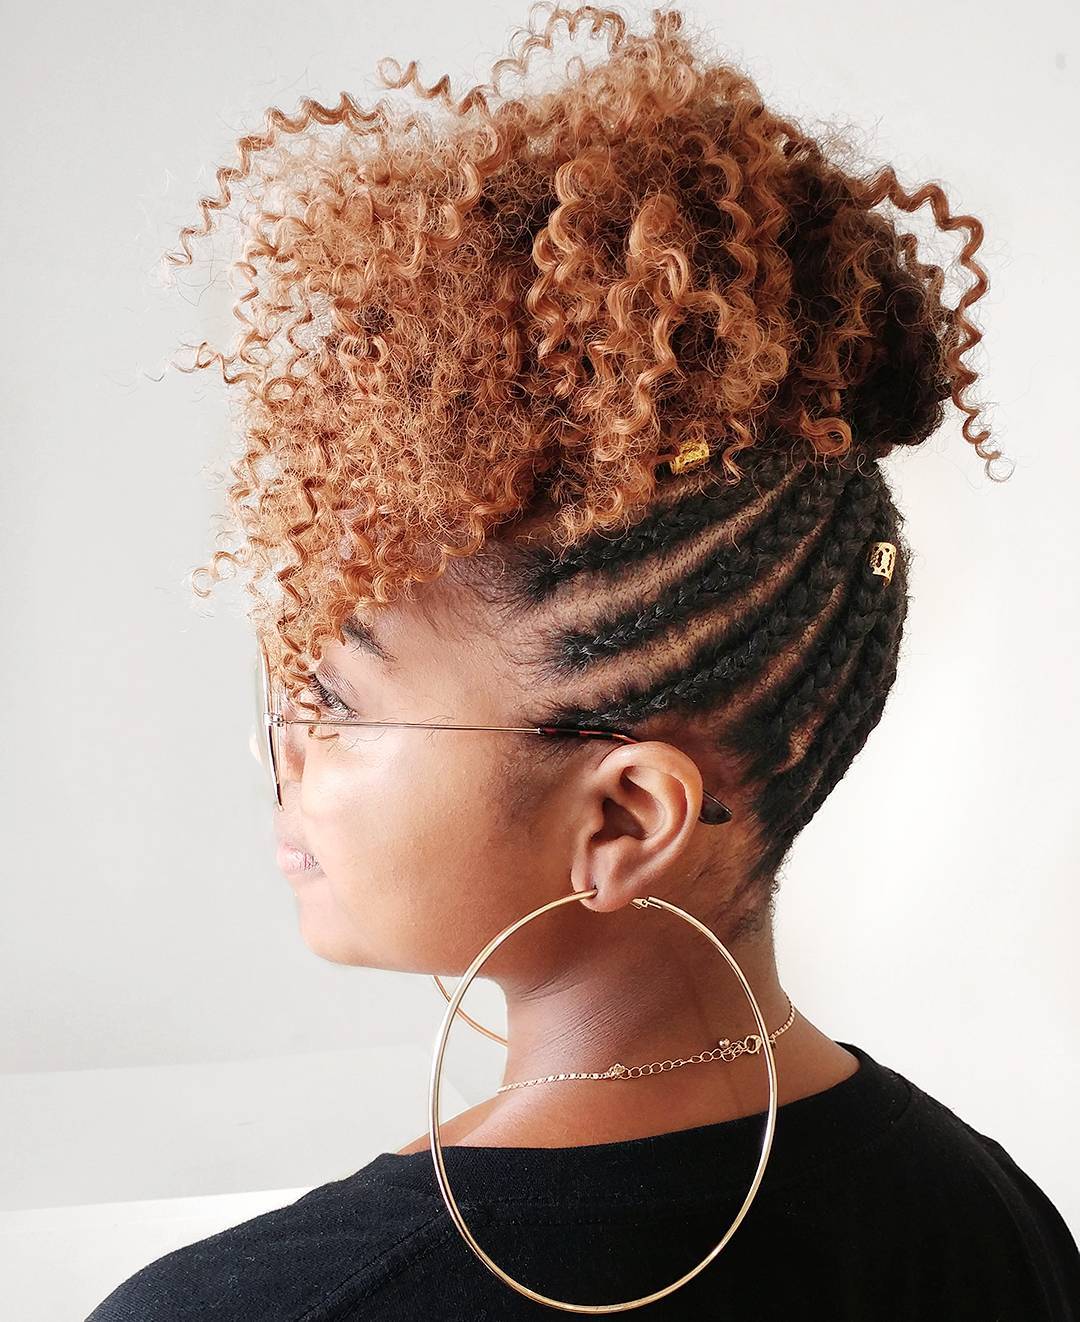 35 Protective Hairstyles For Natural Hair Captured On Instagram